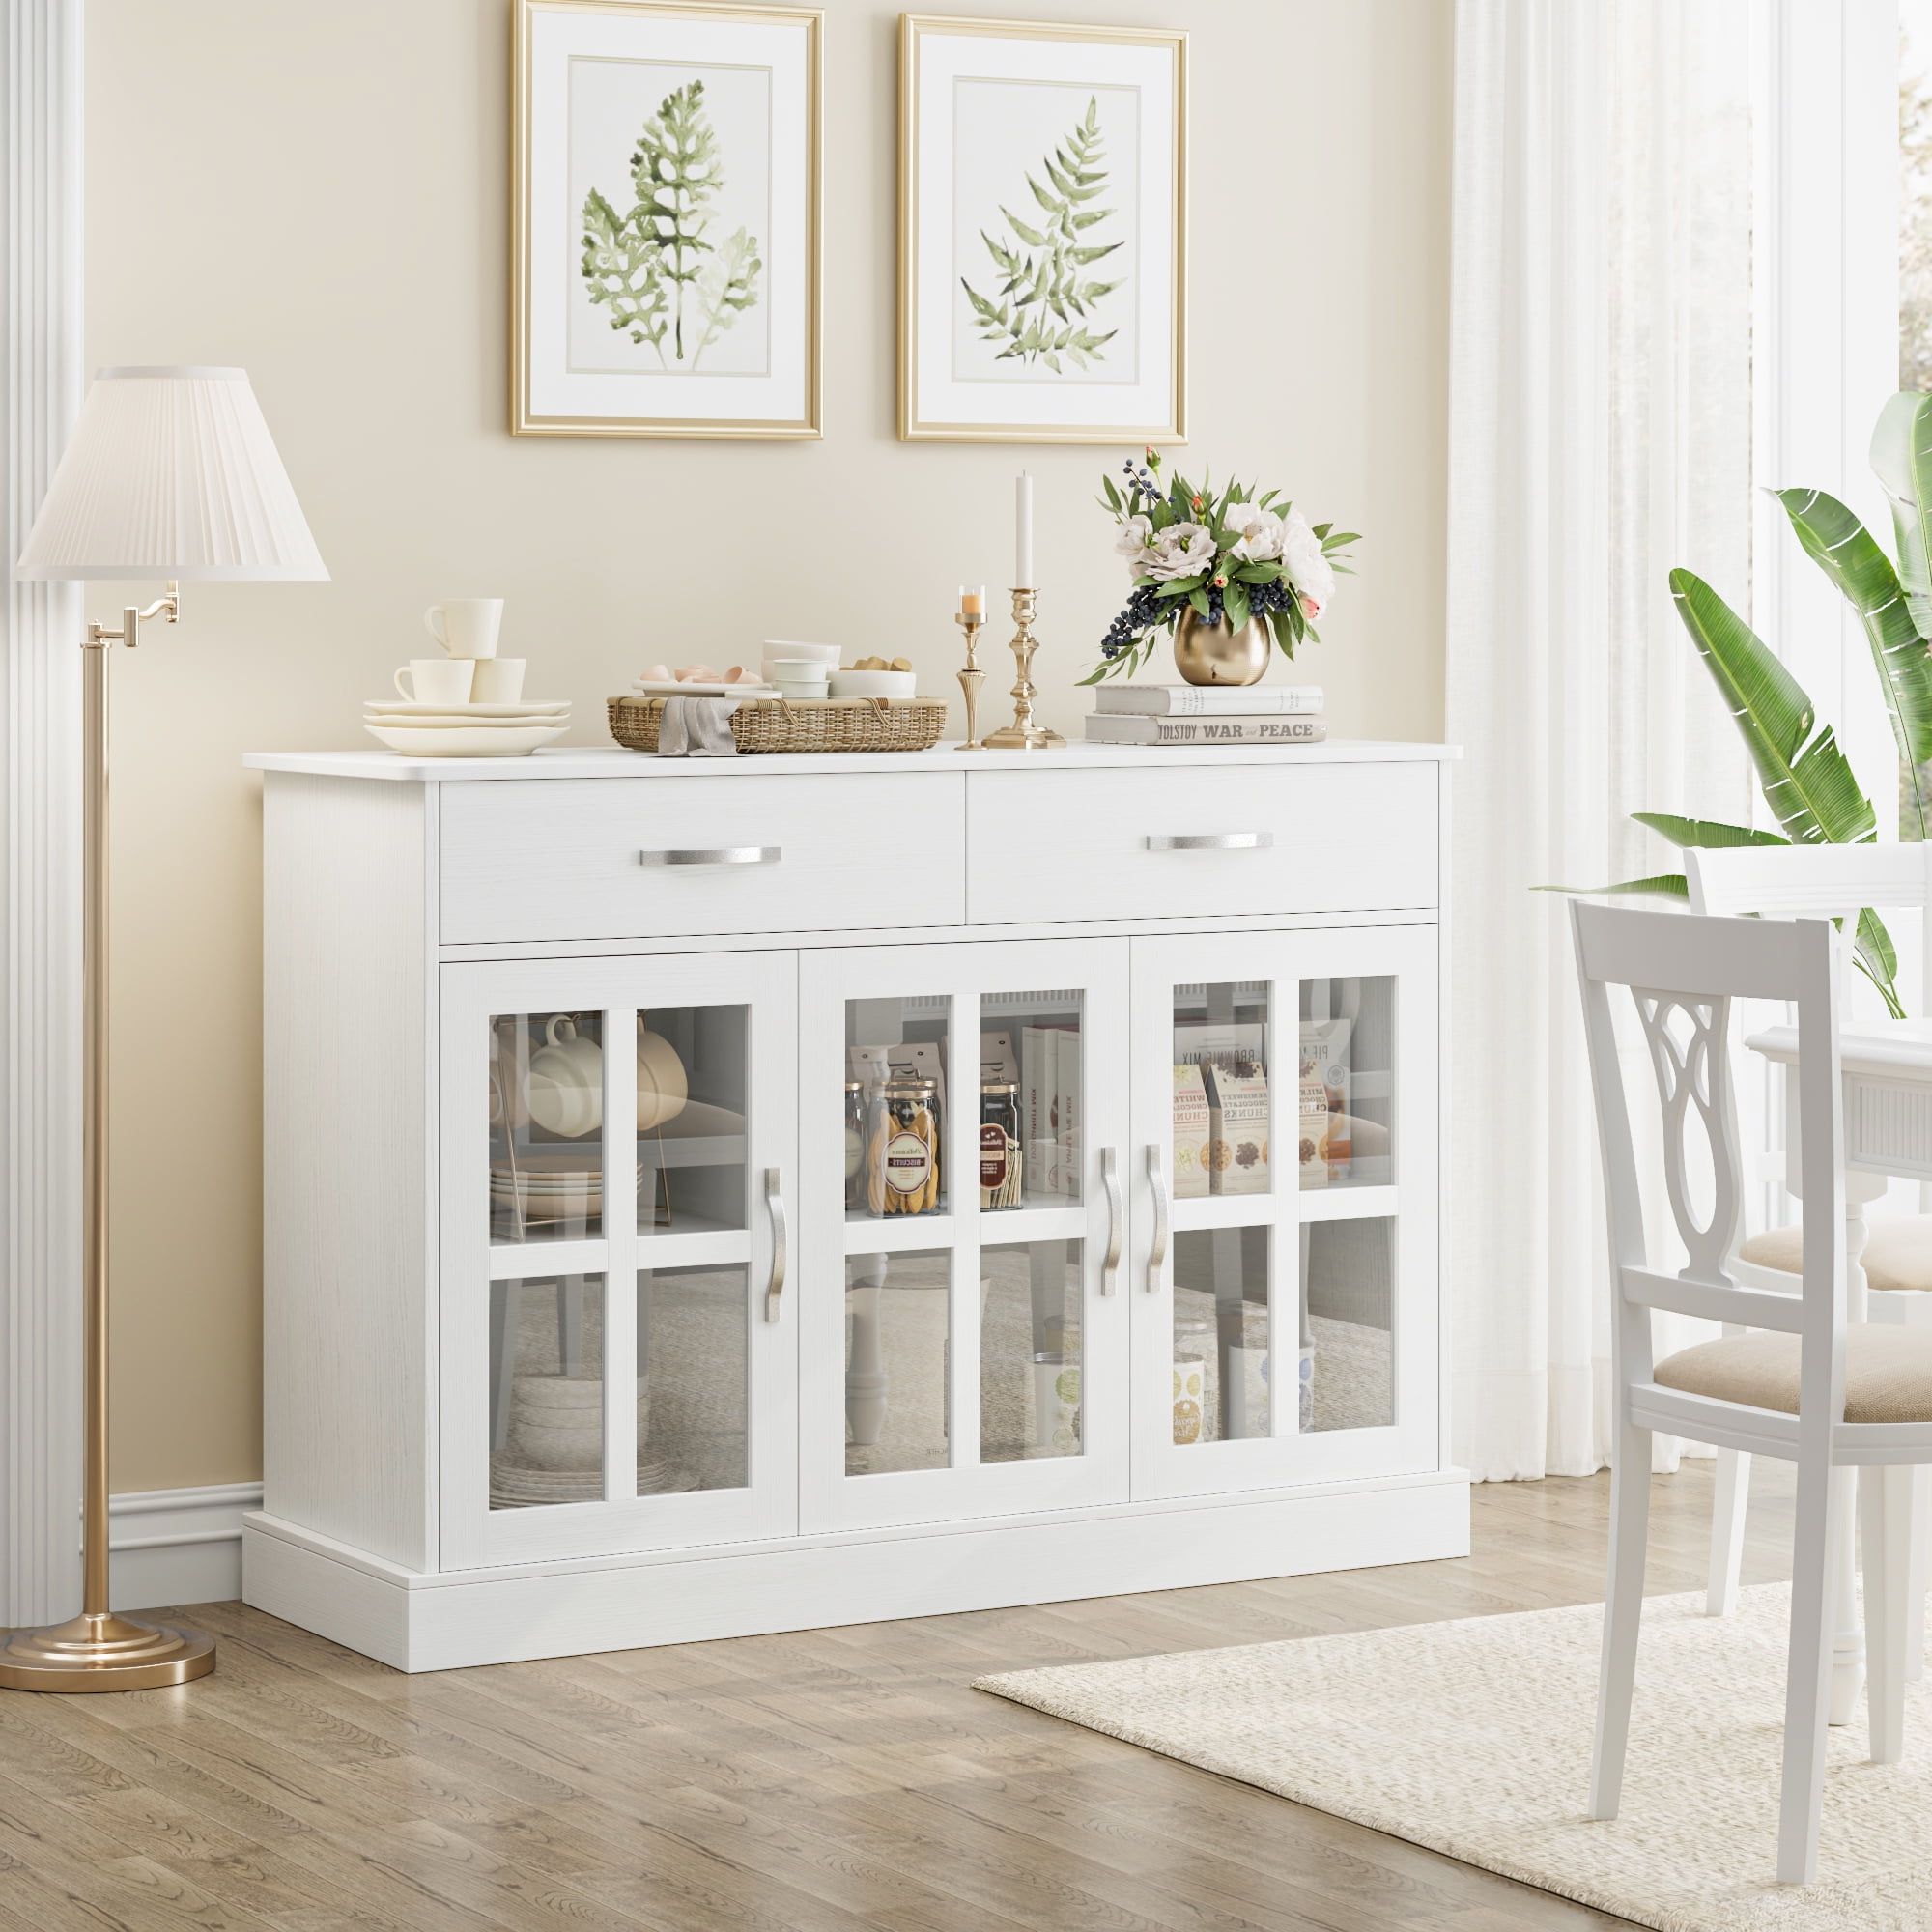 Homfa Buffet Storage Cabinet, Kitchen Sideboard With 3 Doors&2 Drawers For  Dining Room, White Finish – Walmart In 3 Doors Sideboards Storage Cabinet (View 16 of 20)